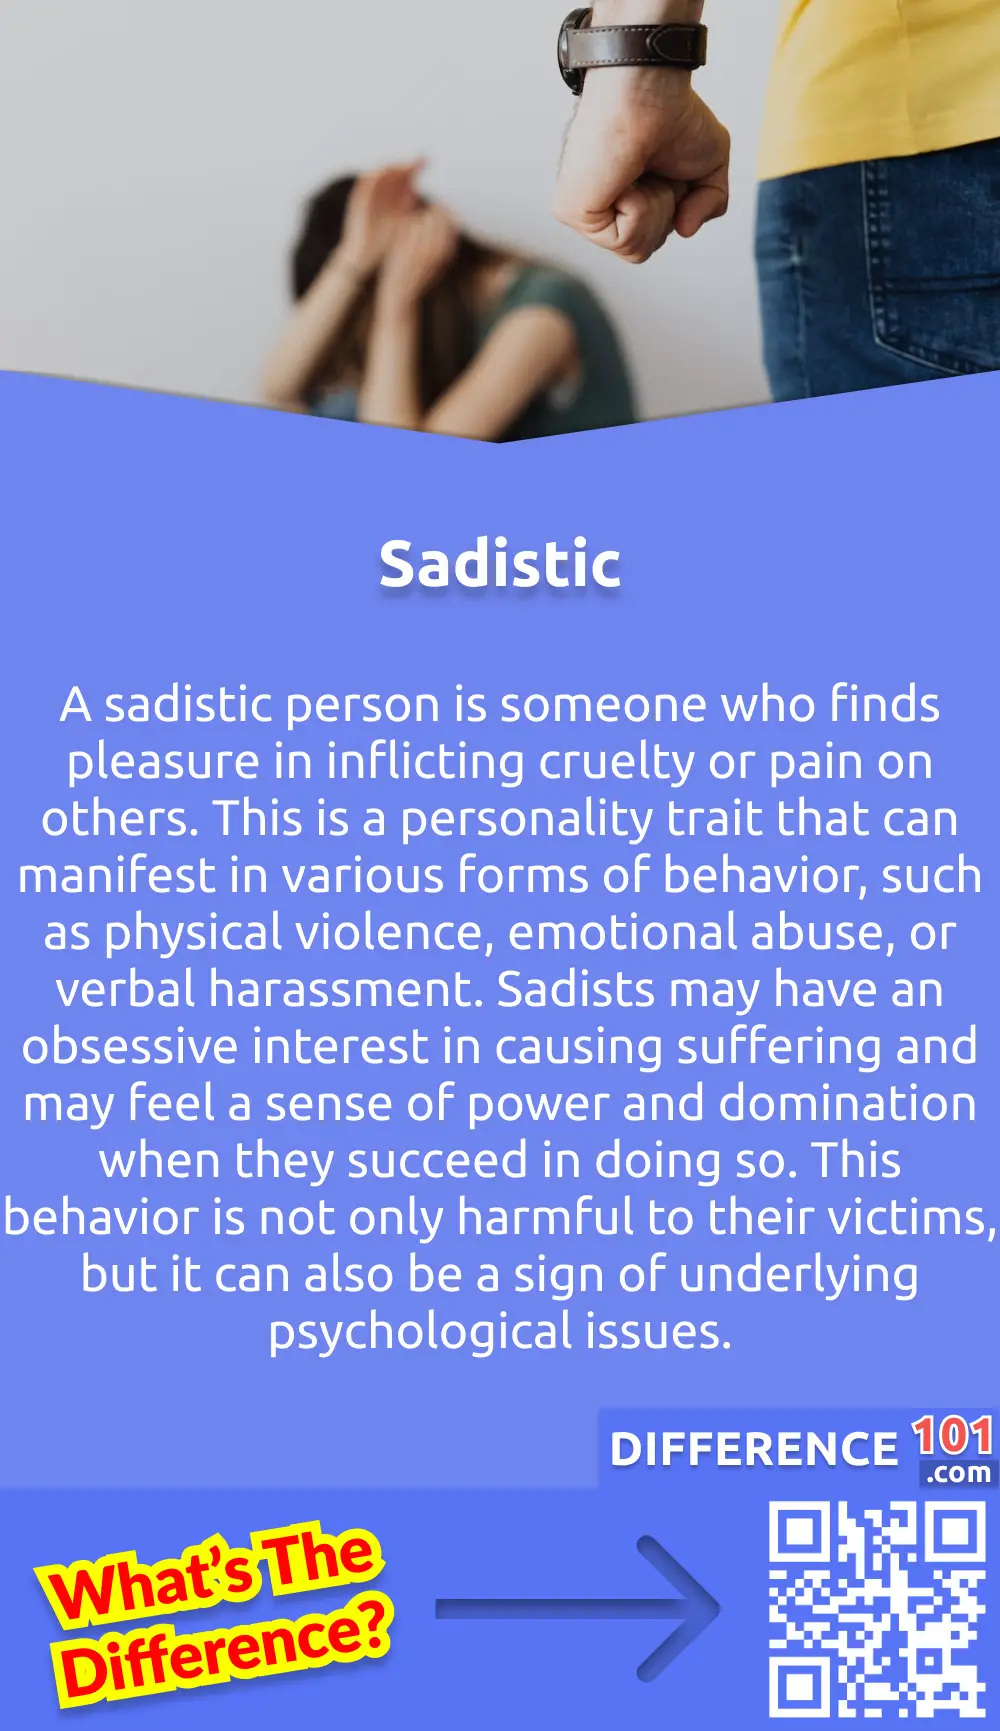 What Is Sadistic? A sadistic person is someone who finds pleasure in inflicting cruelty or pain on others. This is a personality trait that can manifest in various forms of behavior, such as physical violence, emotional abuse, or verbal harassment. Sadists may have an obsessive interest in causing suffering and may feel a sense of power and domination when they succeed in doing so. This behavior is not only harmful to their victims, but it can also be a sign of underlying psychological issues. Sadism is considered a serious mental disorder and can lead to legal repercussions. Therefore, it is essential to seek professional help if you or someone you know shows symptoms of sadistic behavior.